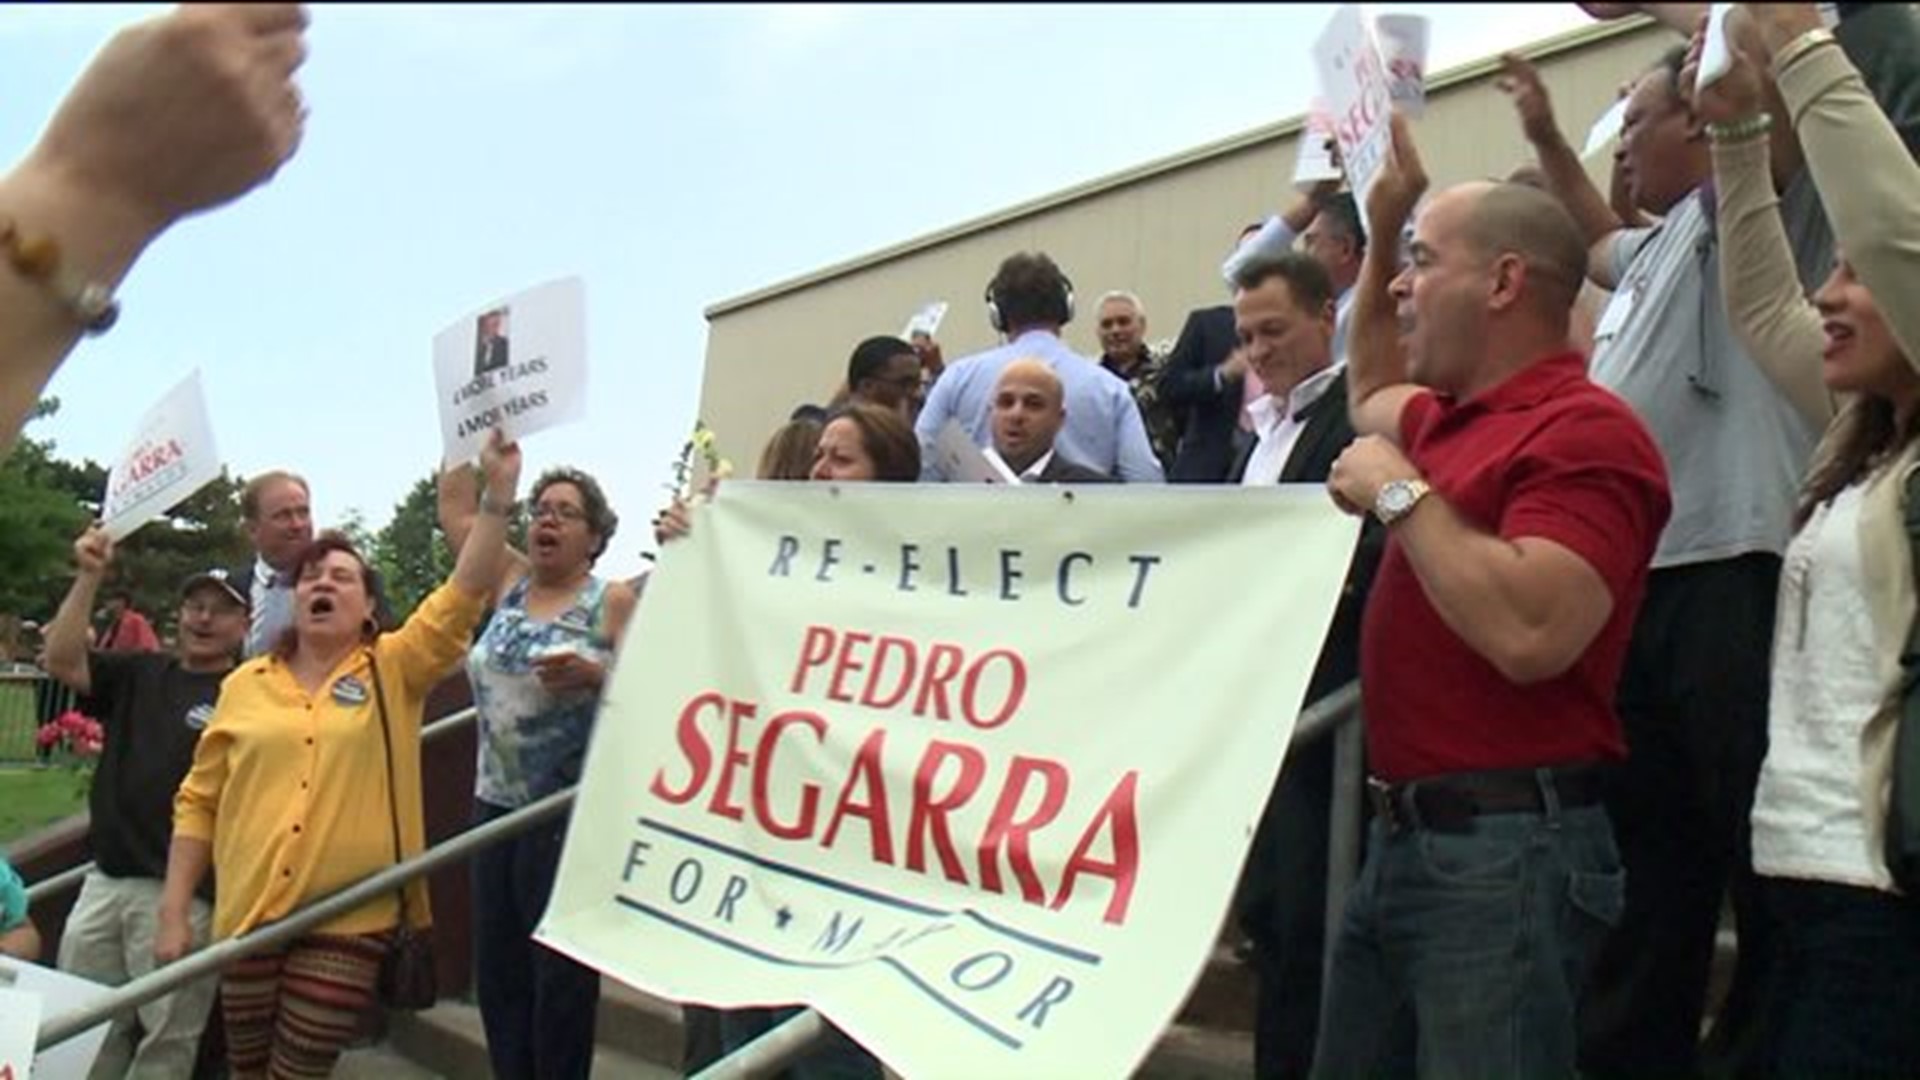 Mayor Segarra changes the equation in campaign for reelection